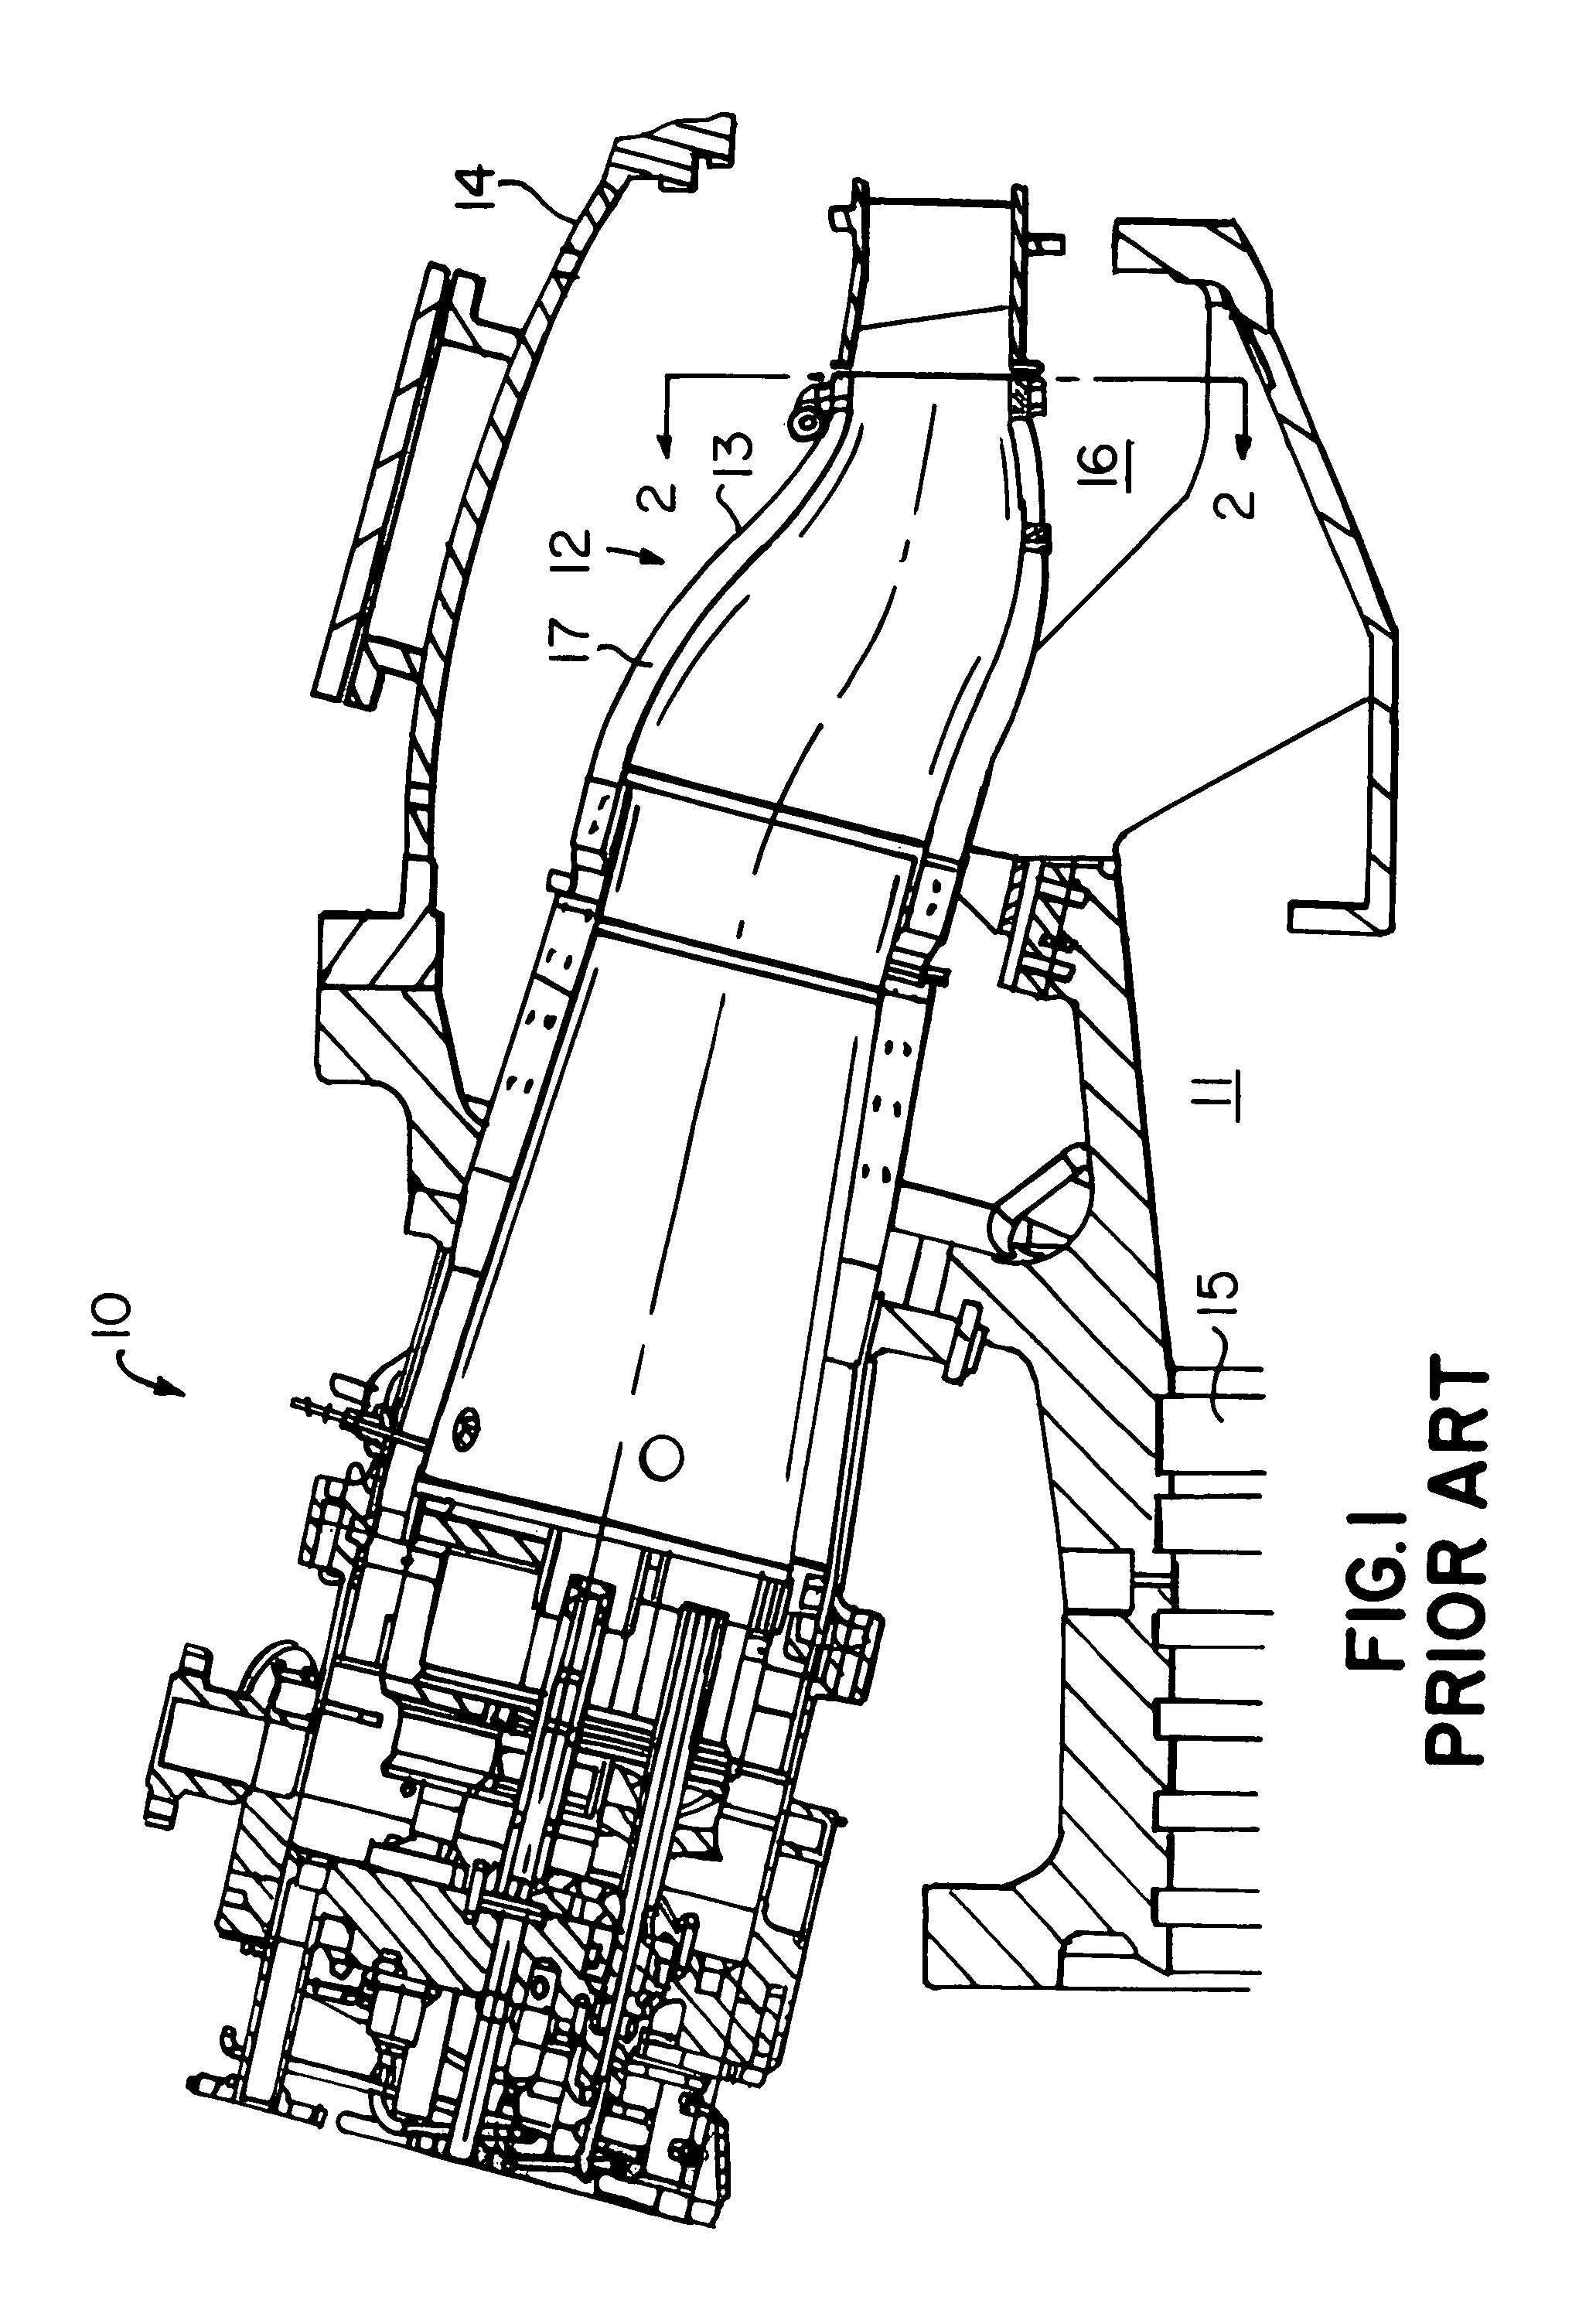 Apparatus and method for reducing the heat rate of a gas turbine powerplant